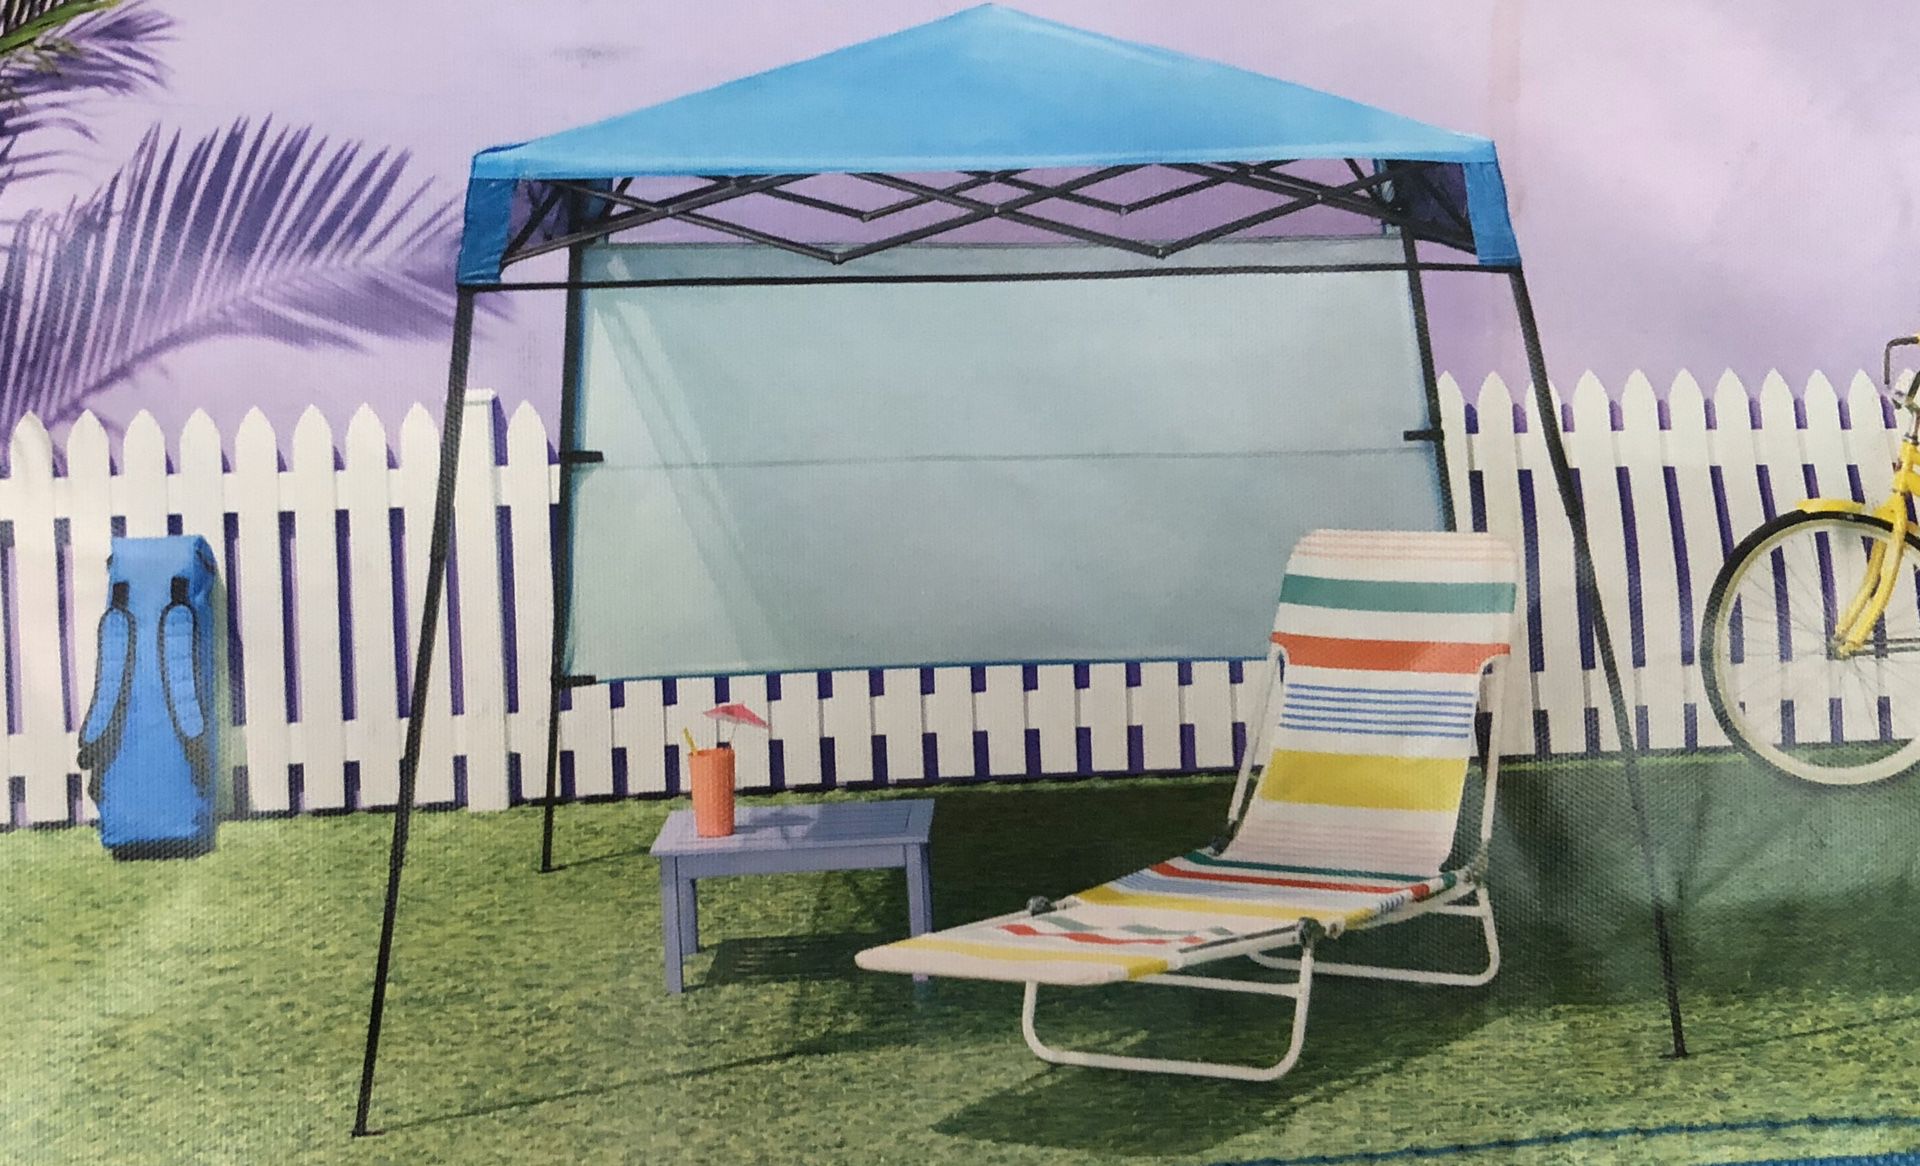 *BRAND NEW* 7’x7’ portable backpack shelter